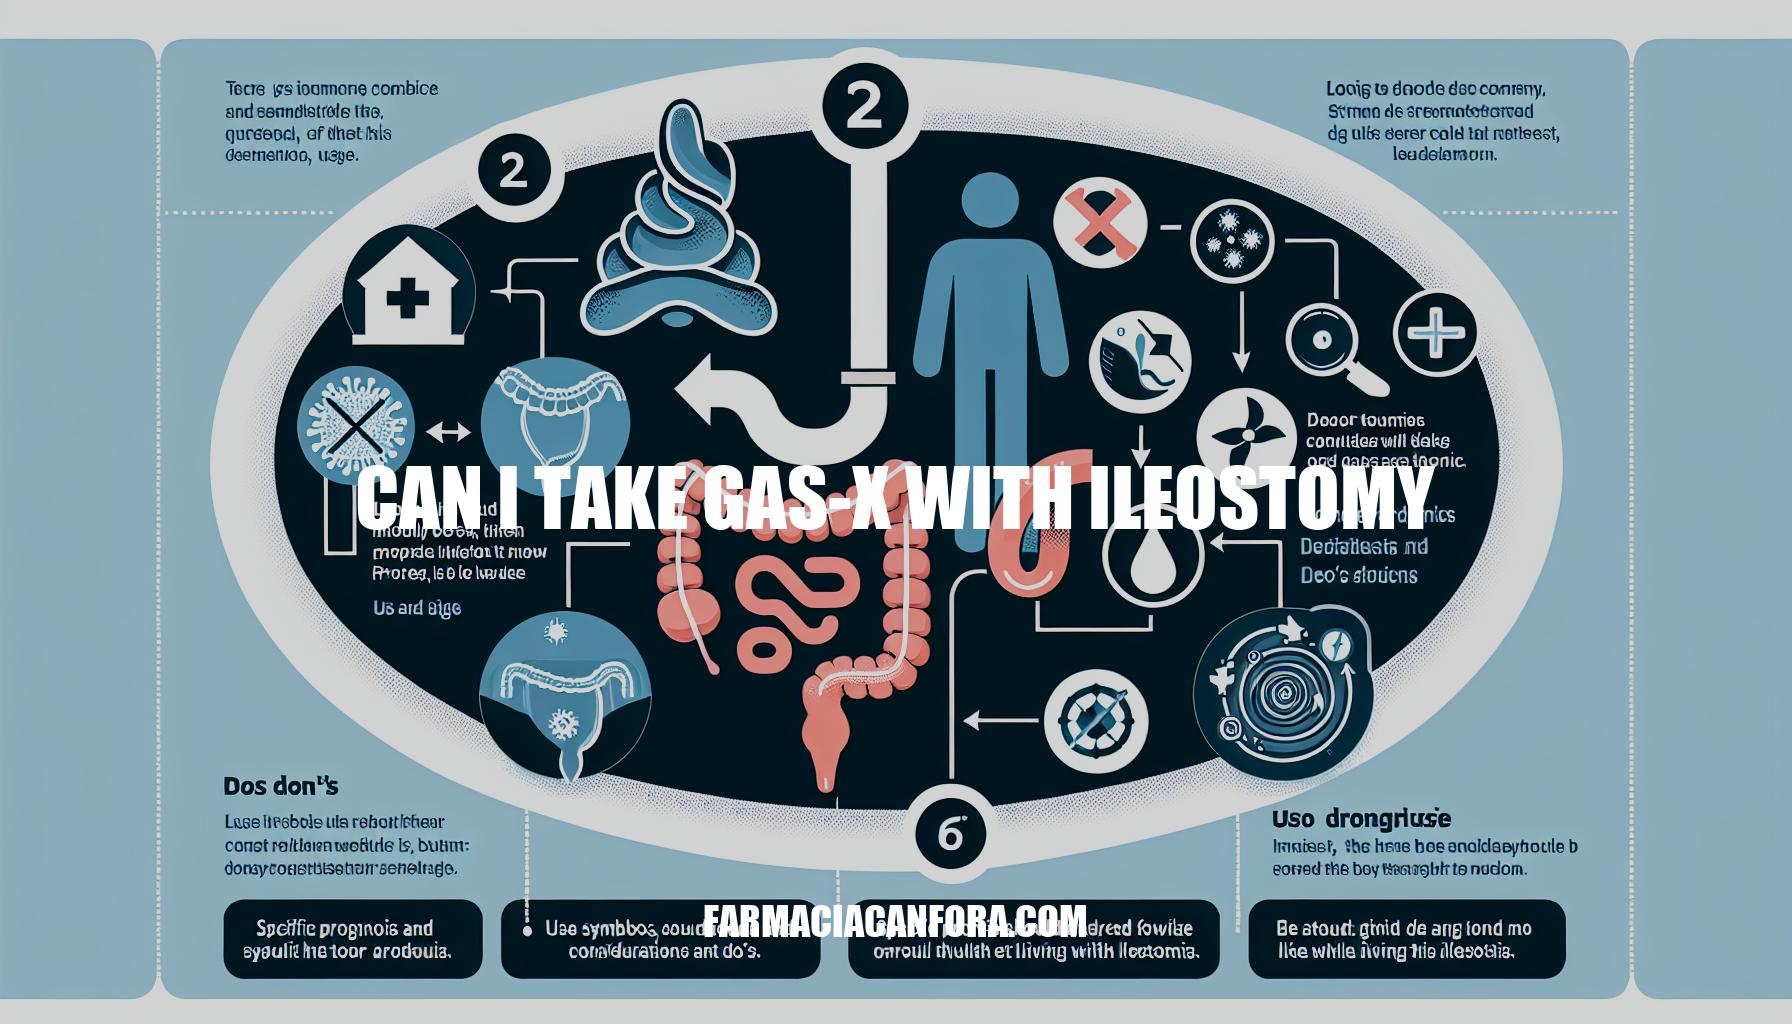 Can I Take Gas-X with Ileostomy: Guidelines and Considerations